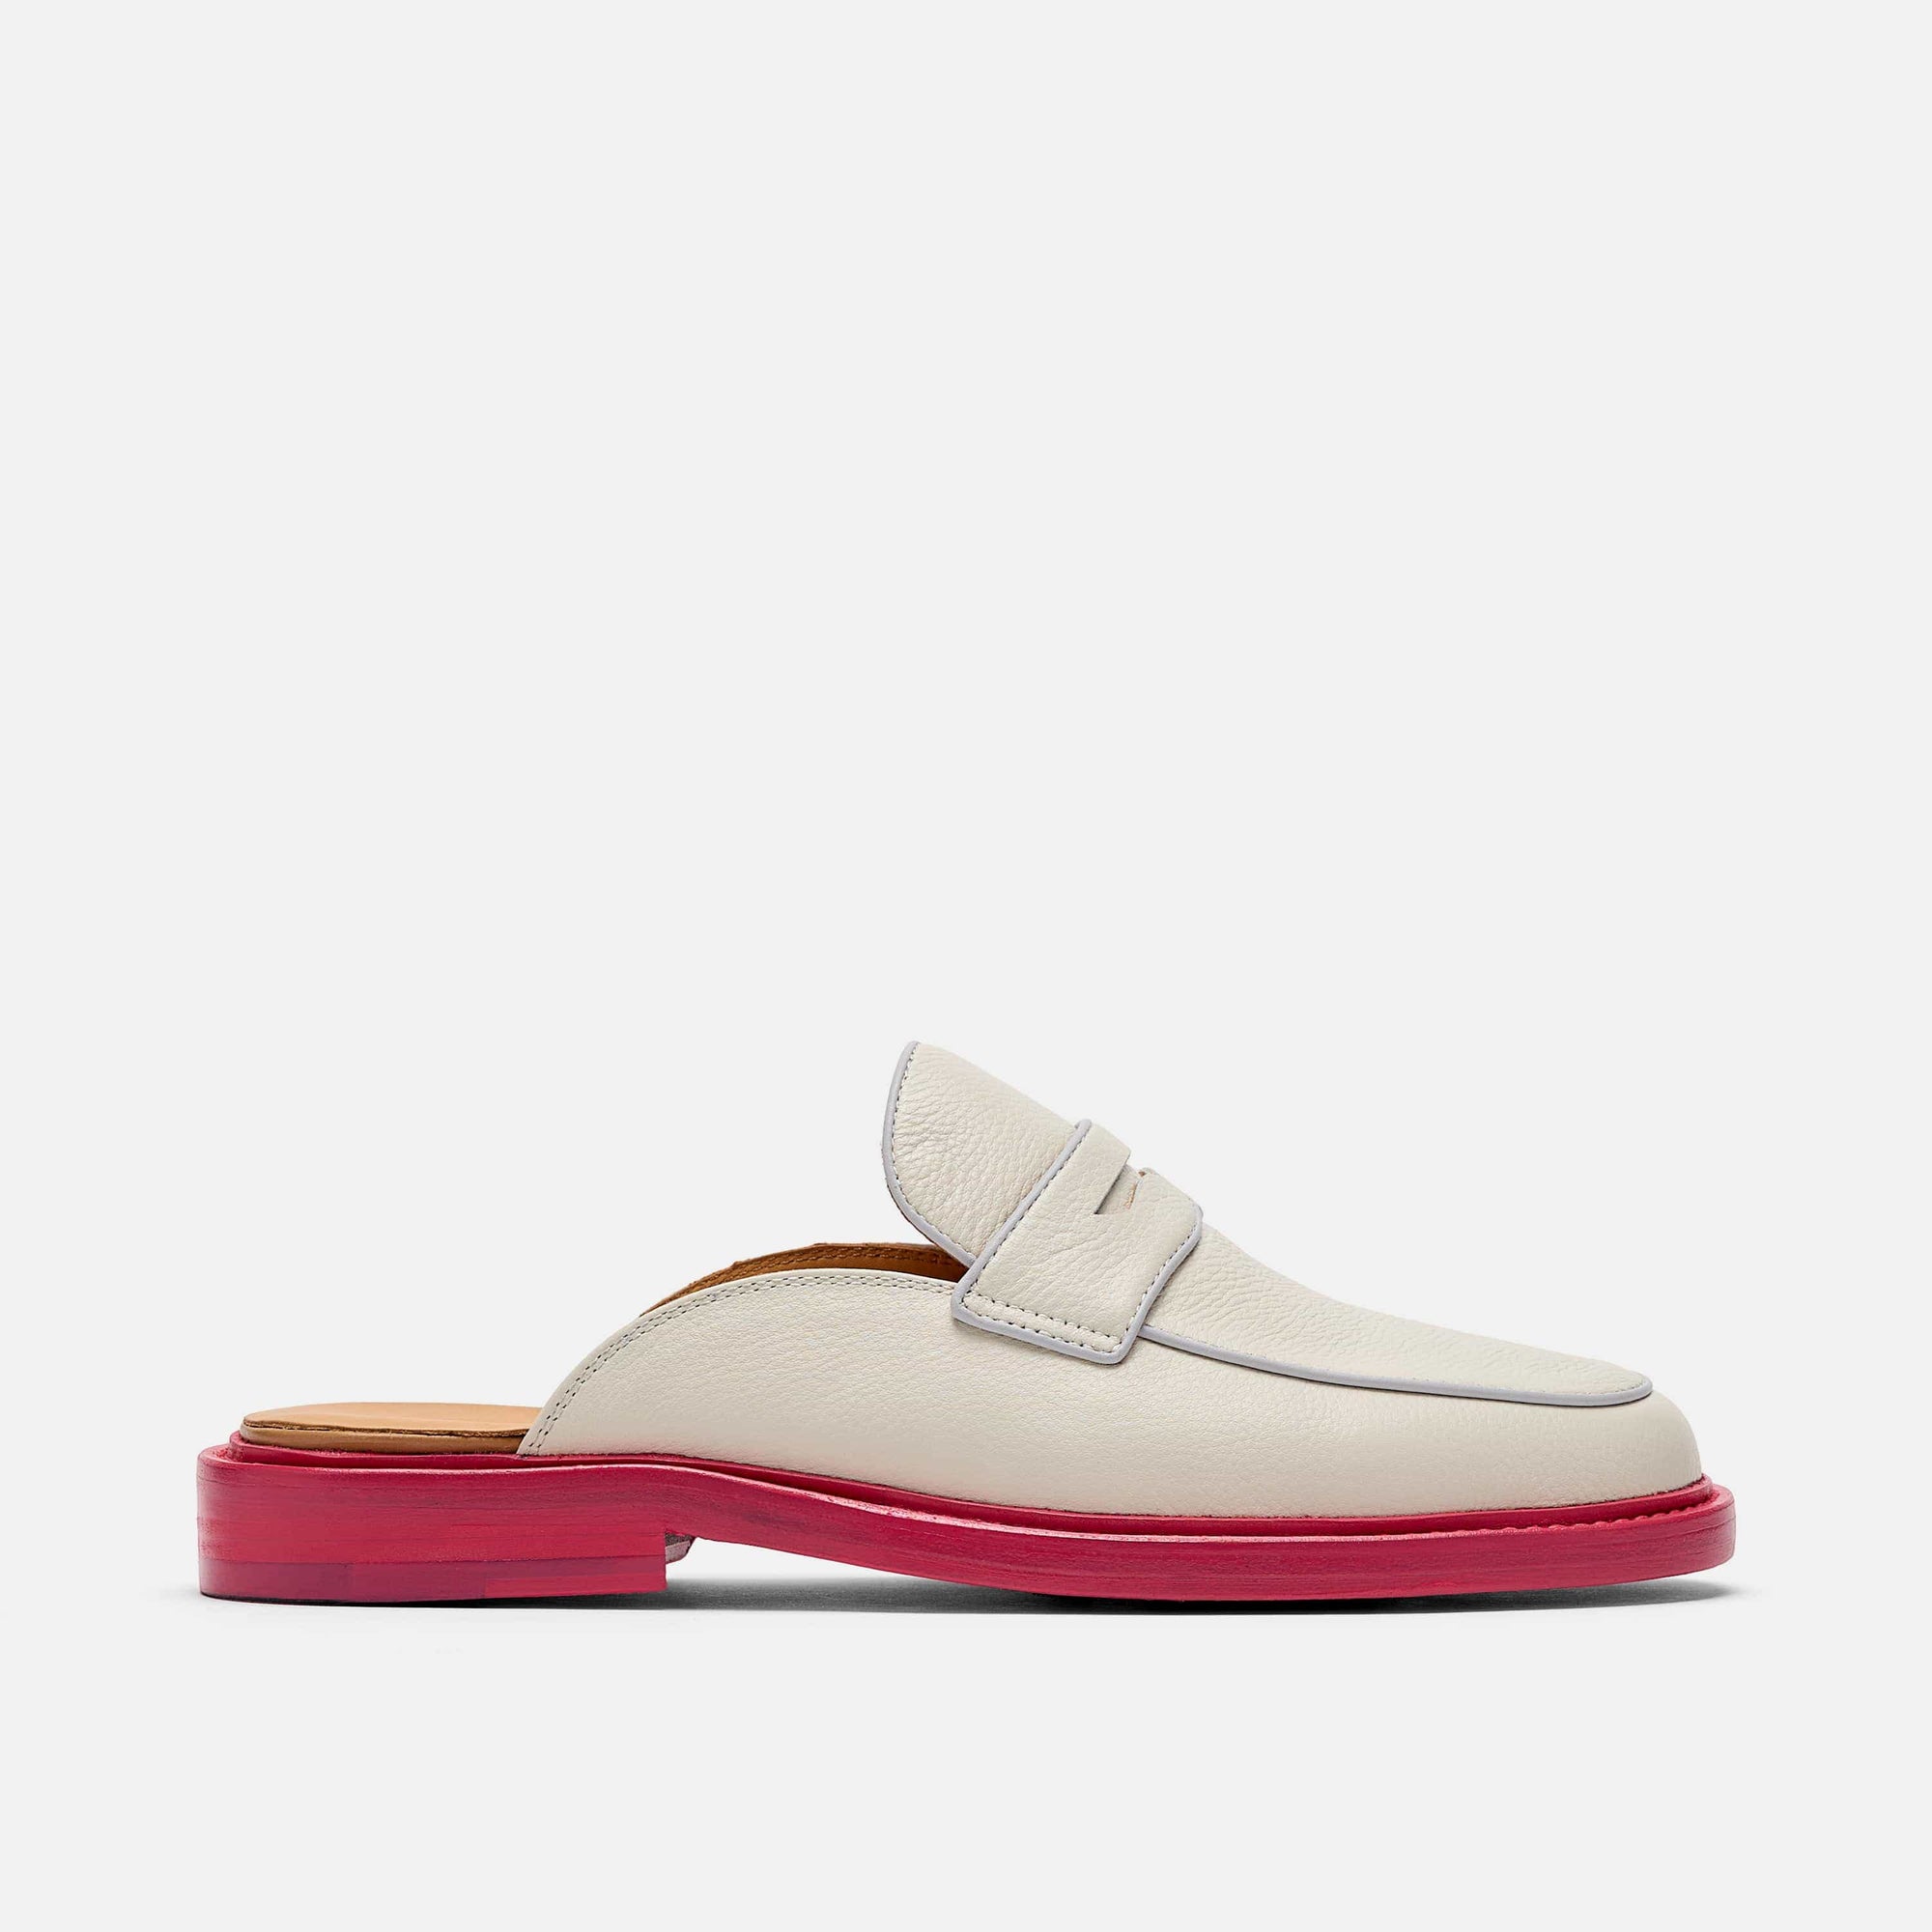 Del Mar Cream Pink Loafer Mules